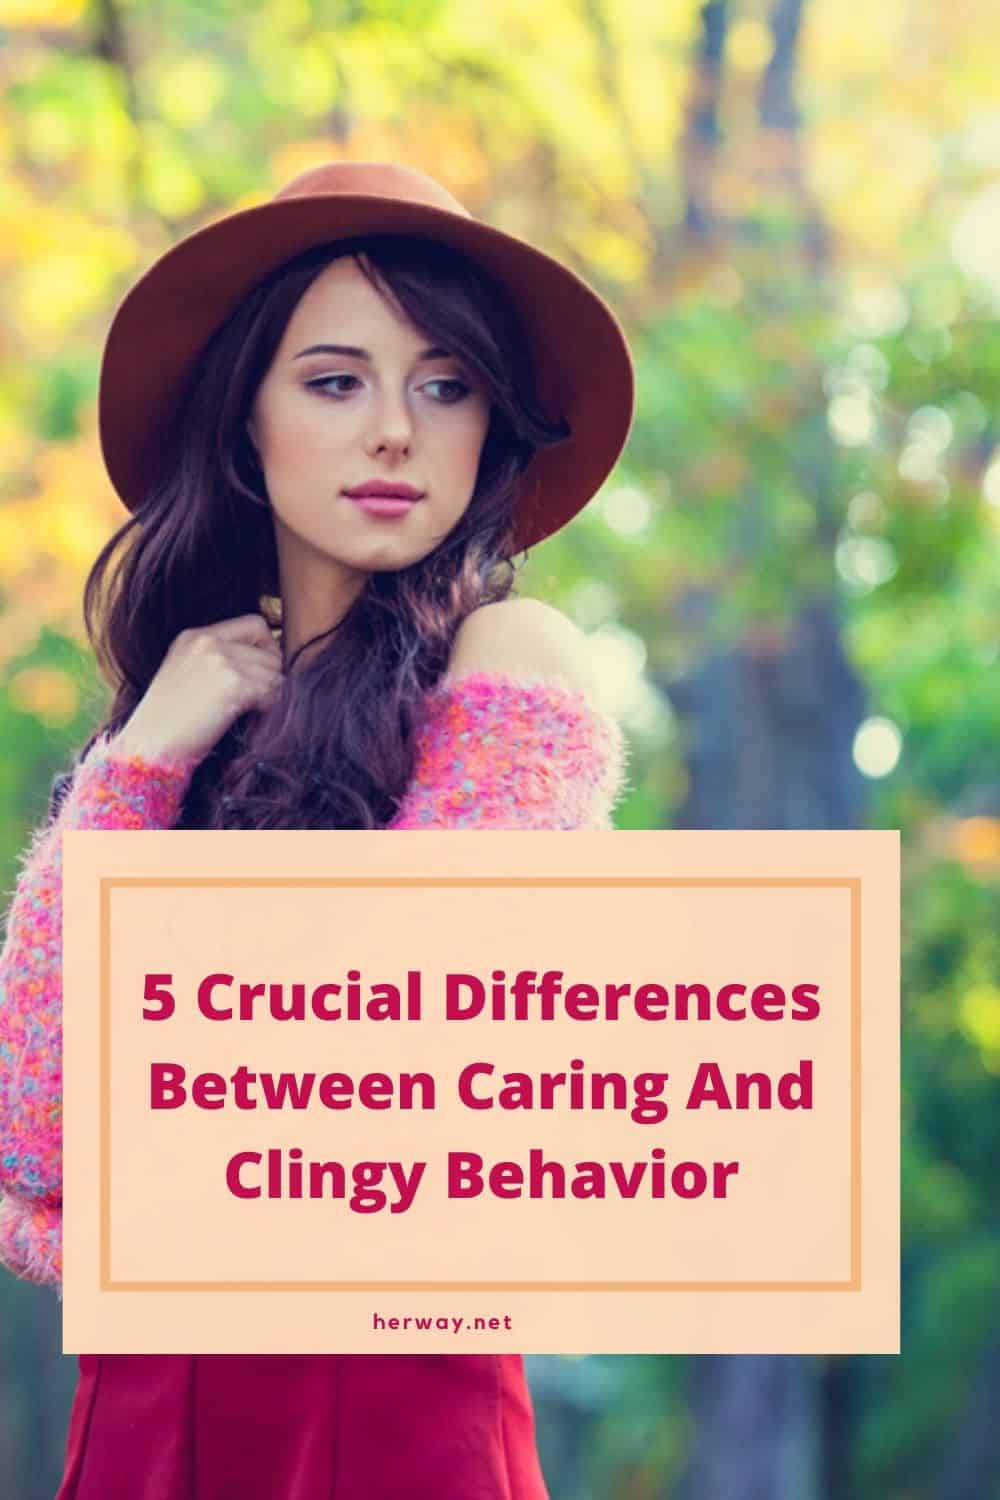 5 Crucial Differences Between Caring And Clingy Behavior